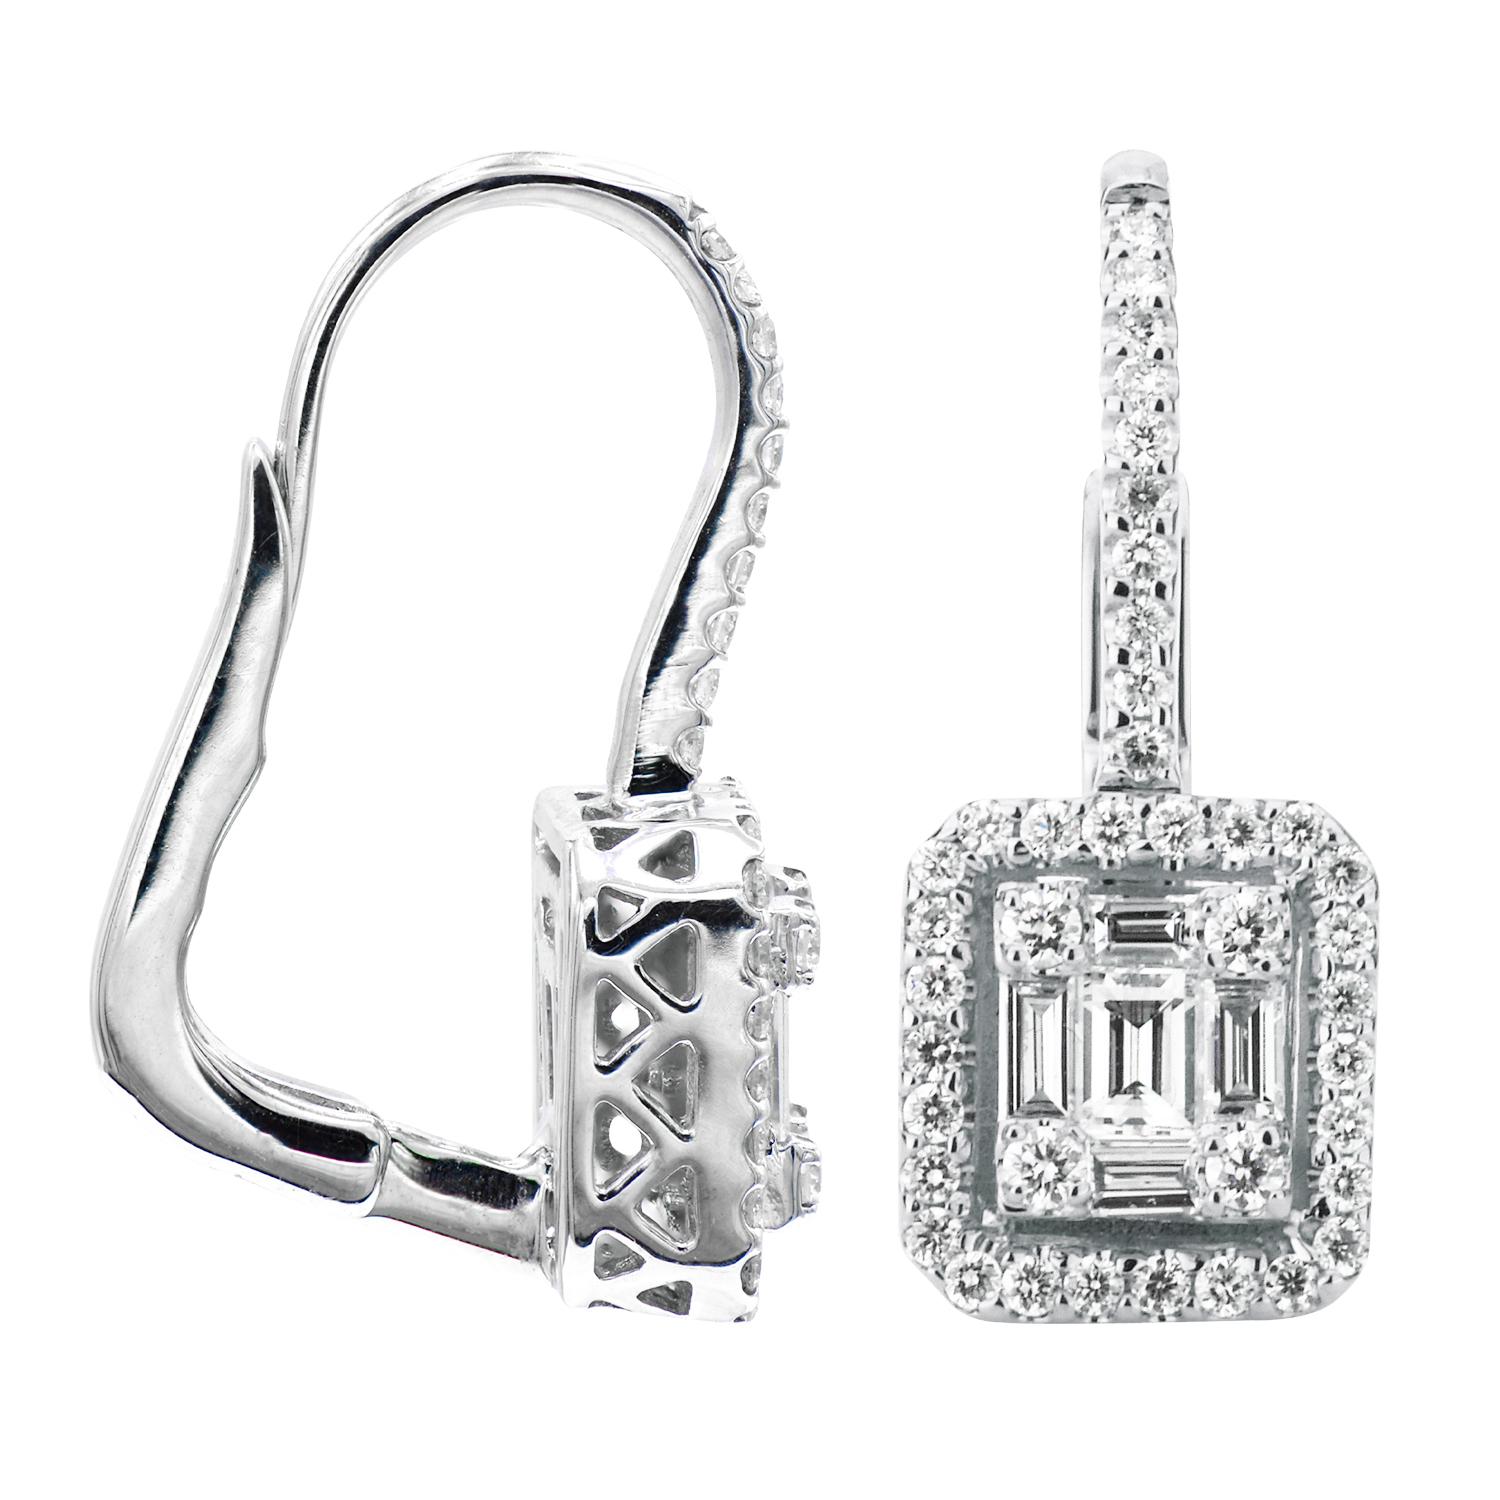 These beautiful emerald illusion diamond earrings are sure to be treasured forever. Each earring contains diamonds that are perfectly matched and assembled to create the look of an emerald cut diamond without a huge price. These earrings contain 76